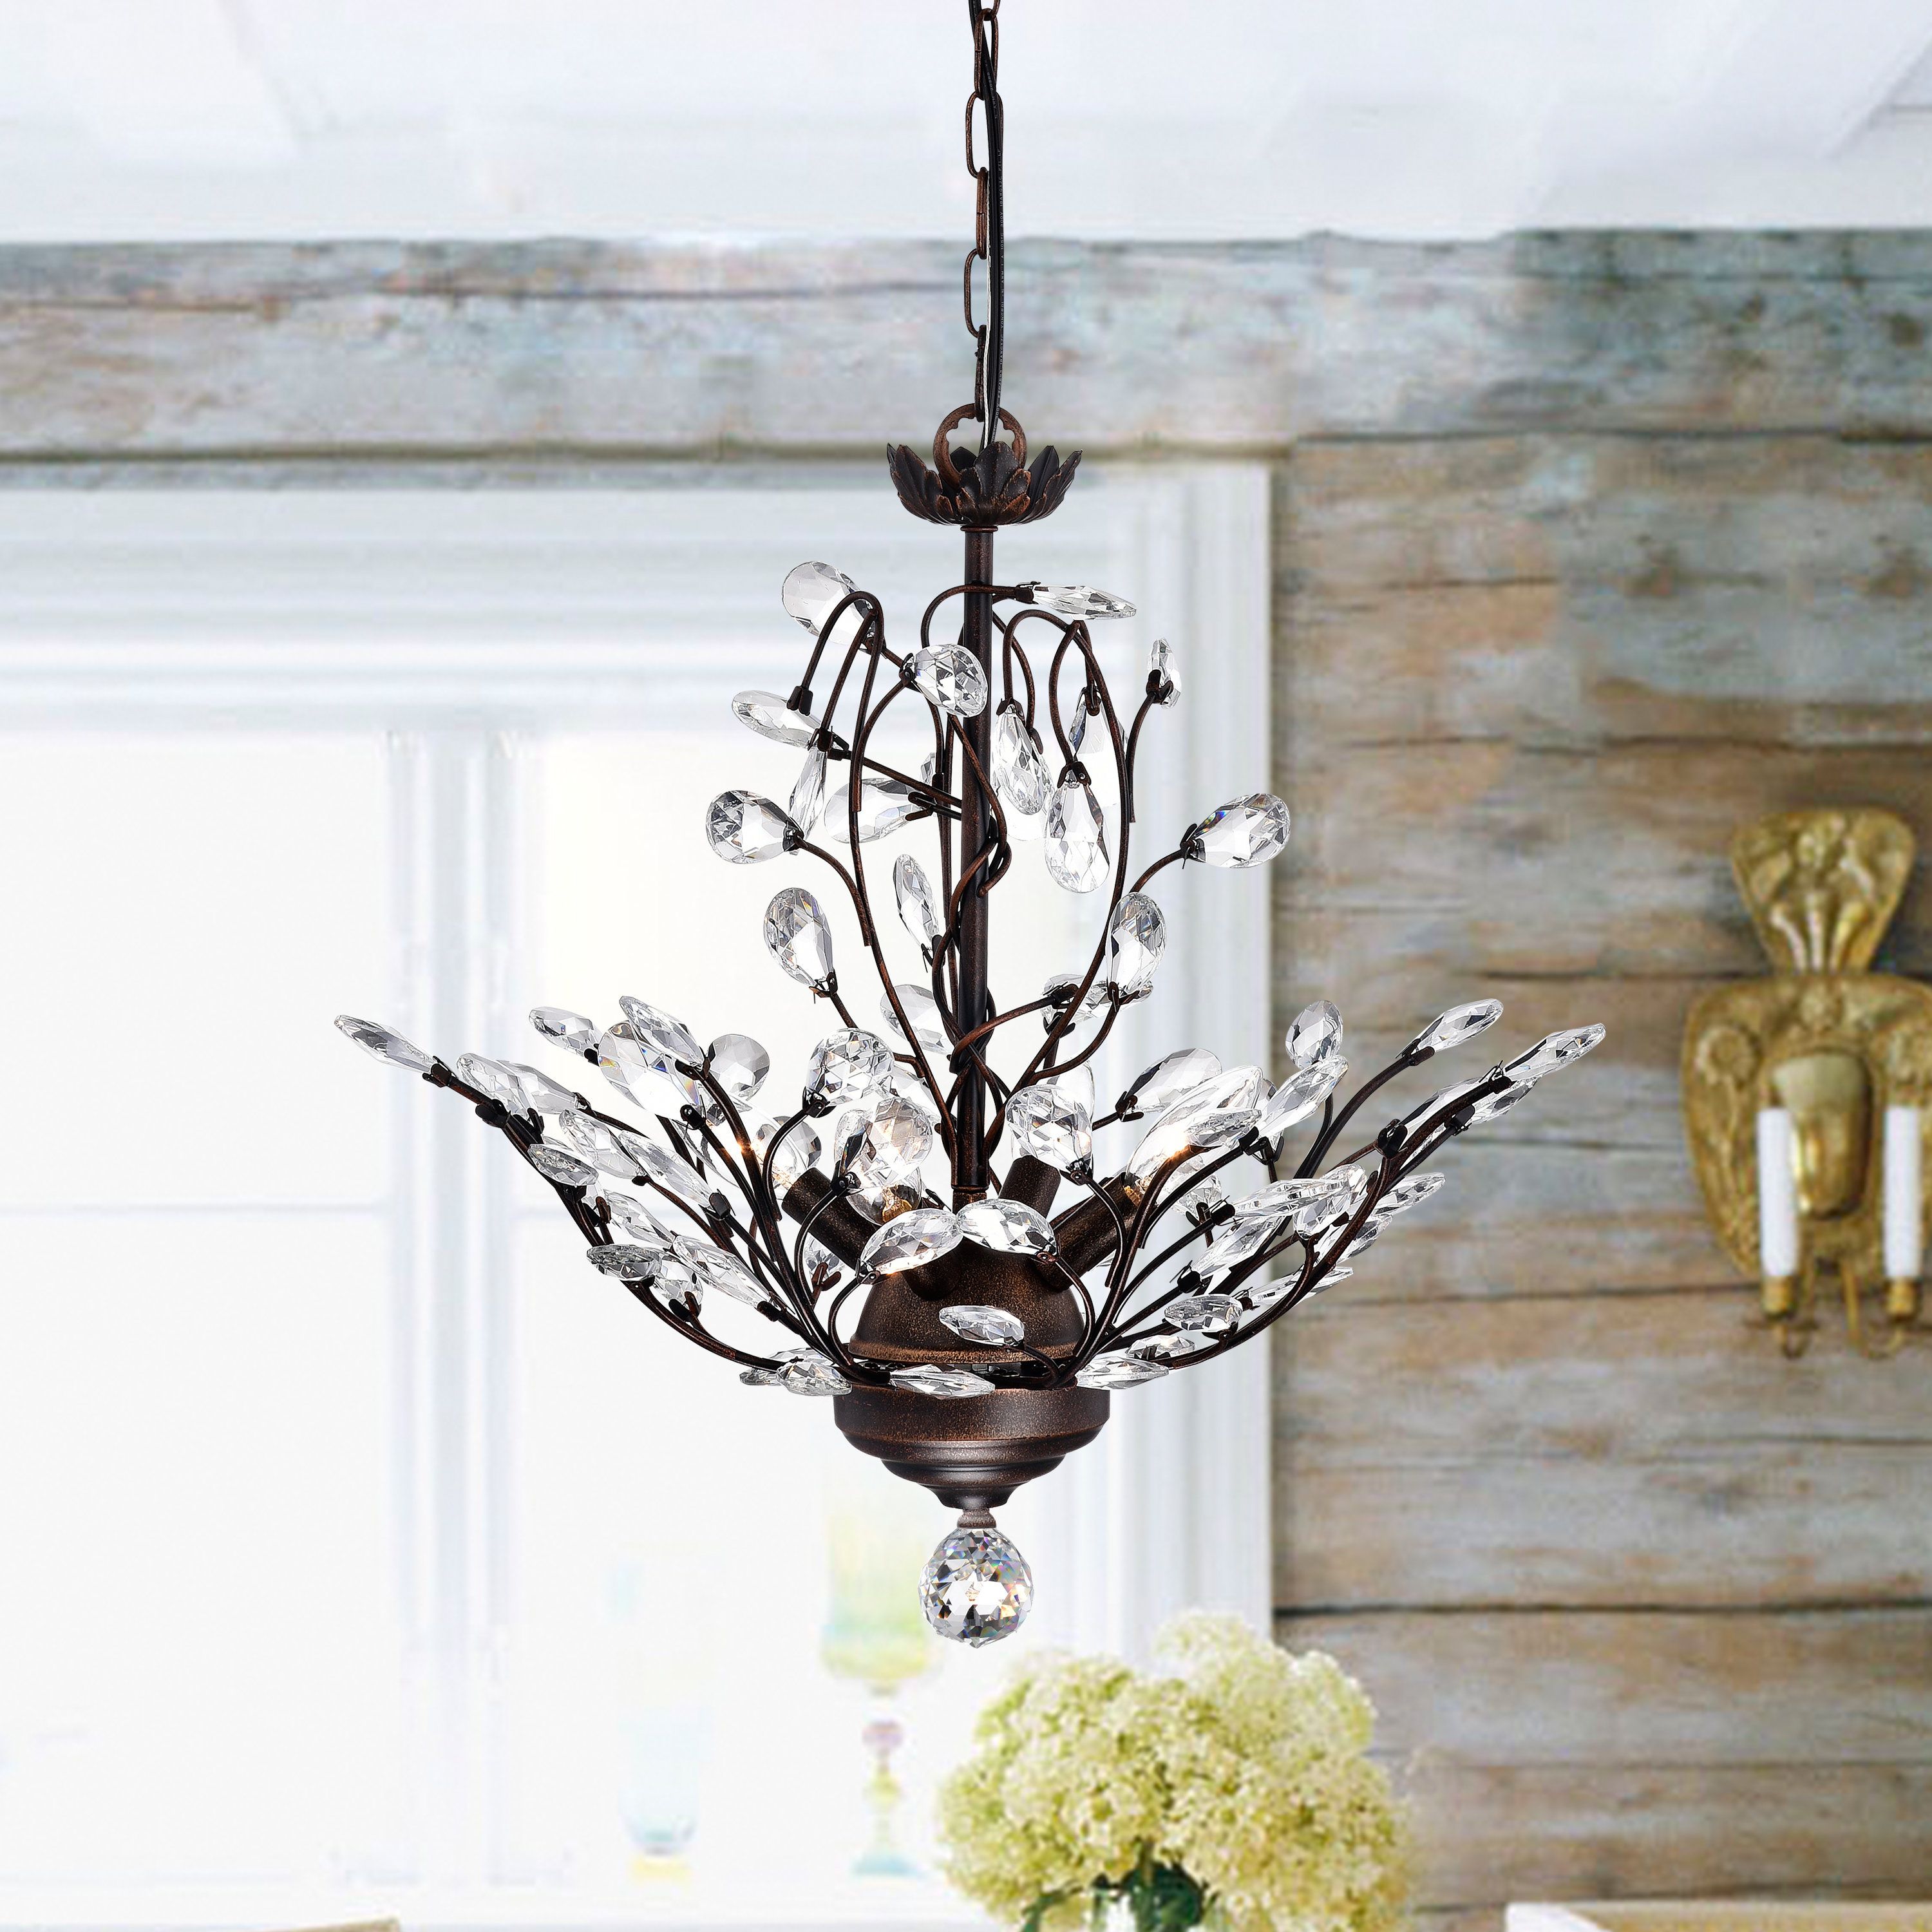 Farmhouse & Rustic Willa Arlo Interiors Chandeliers | Birch Lane Throughout Hermione 5 Light Drum Chandeliers (View 18 of 30)